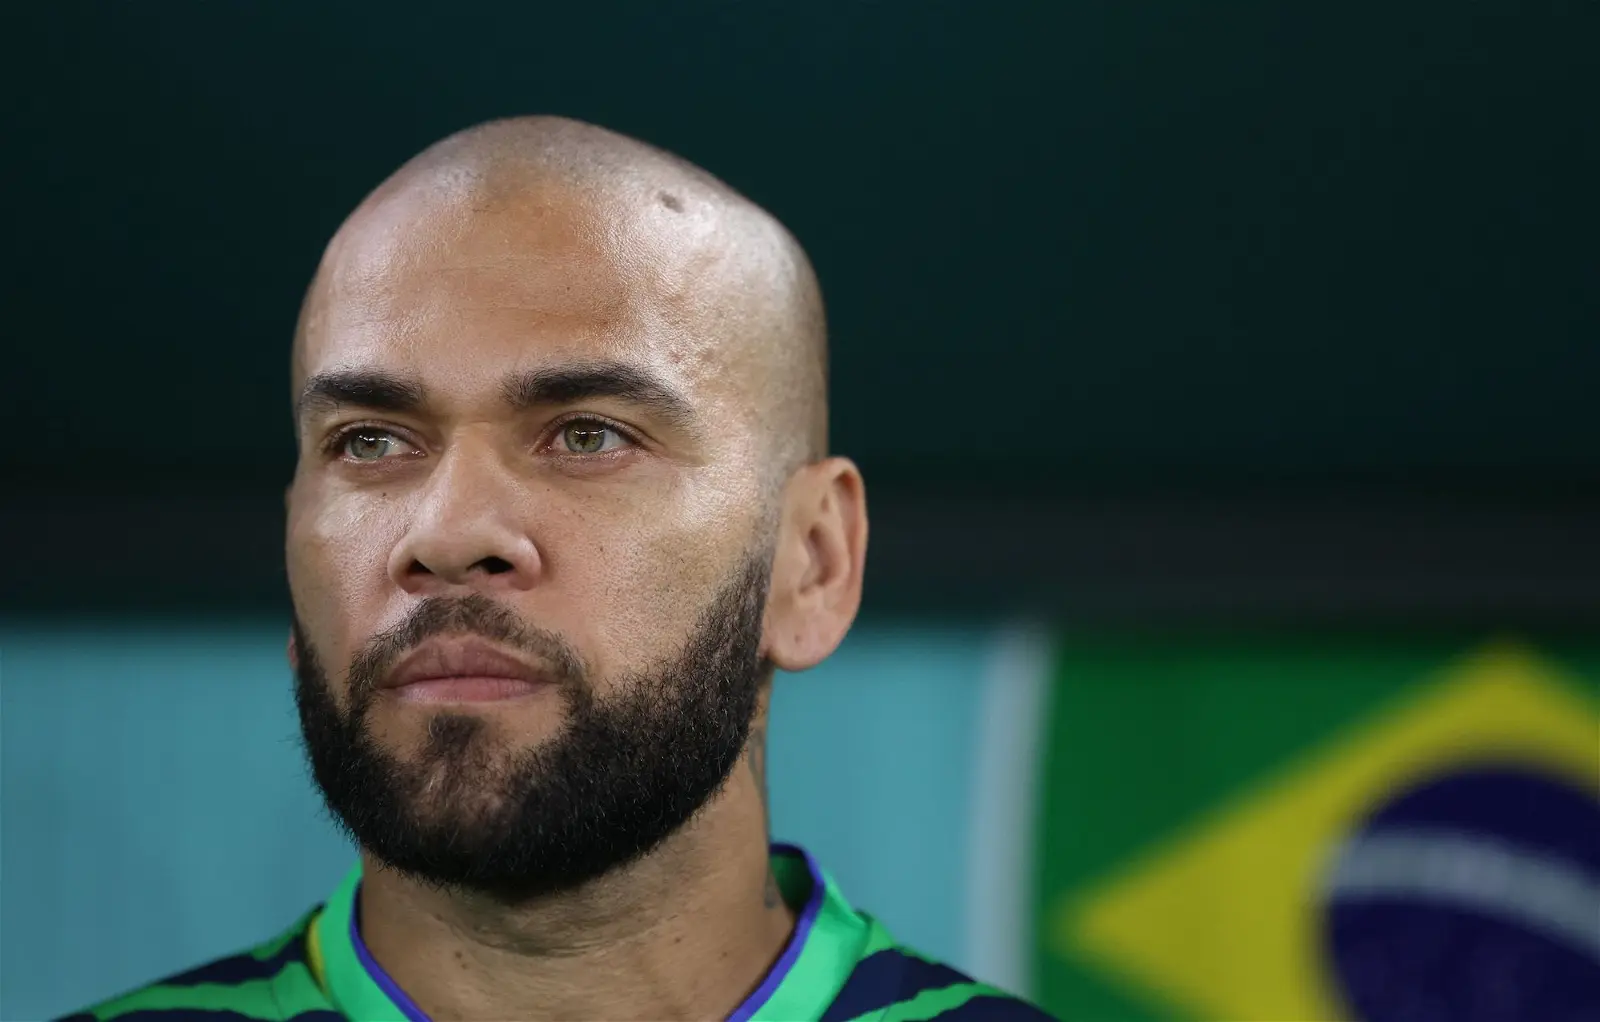 Dani Alves will be held in prison after being denied bail